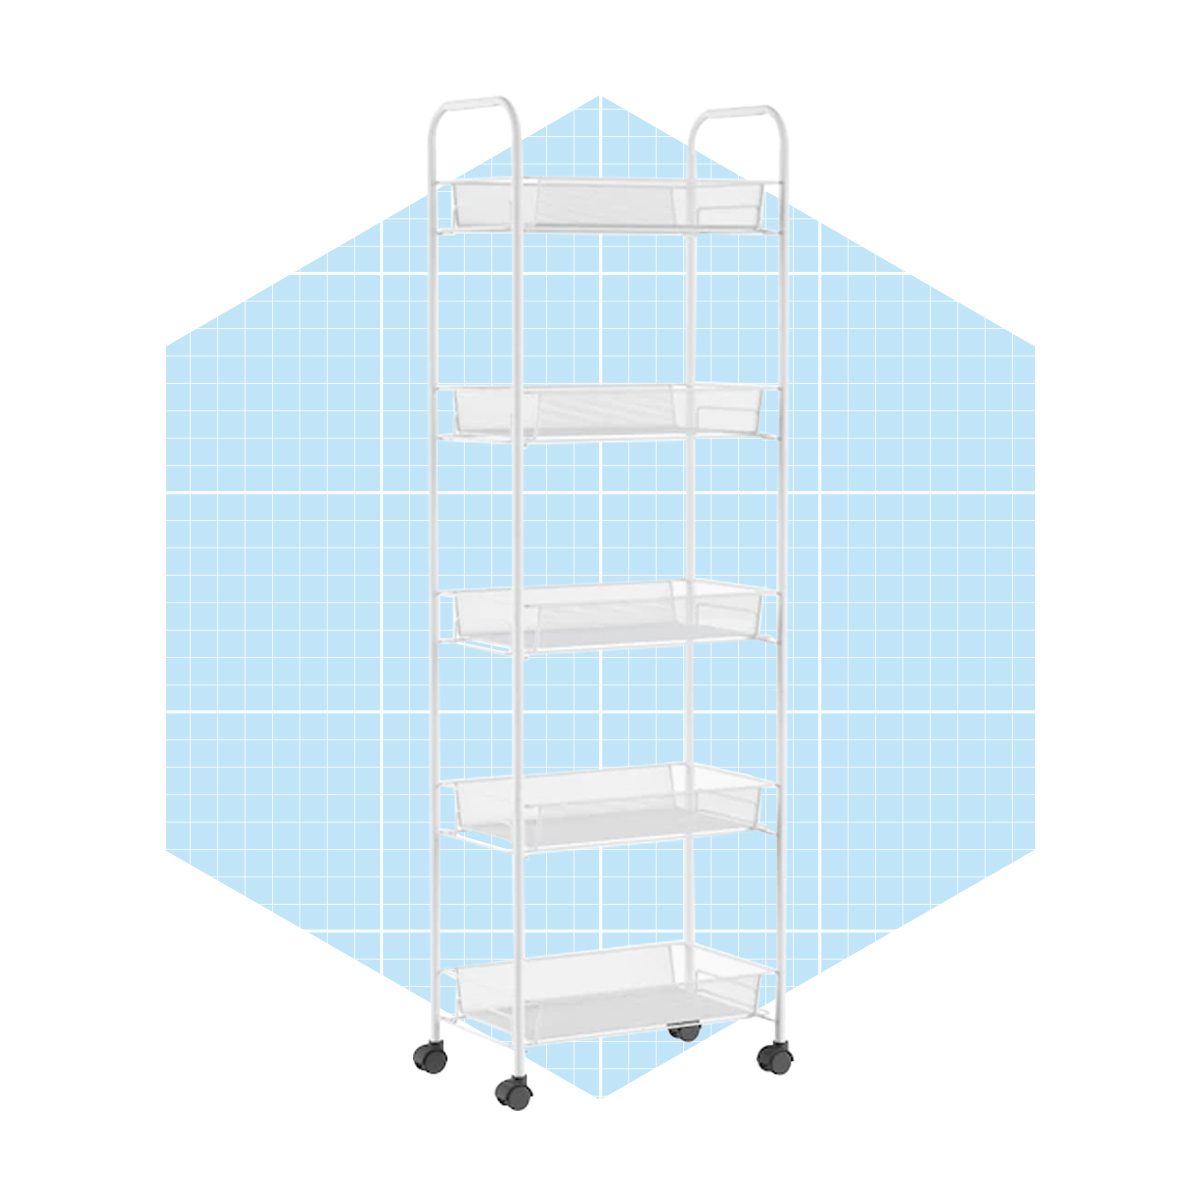 https://www.familyhandyman.com/wp-content/uploads/2021/06/Hastings-Home-5-Tiered-Narrow-Rolling-Storage_Shelves_ecomm-lowes.com_.jpg?fit=700%2C700